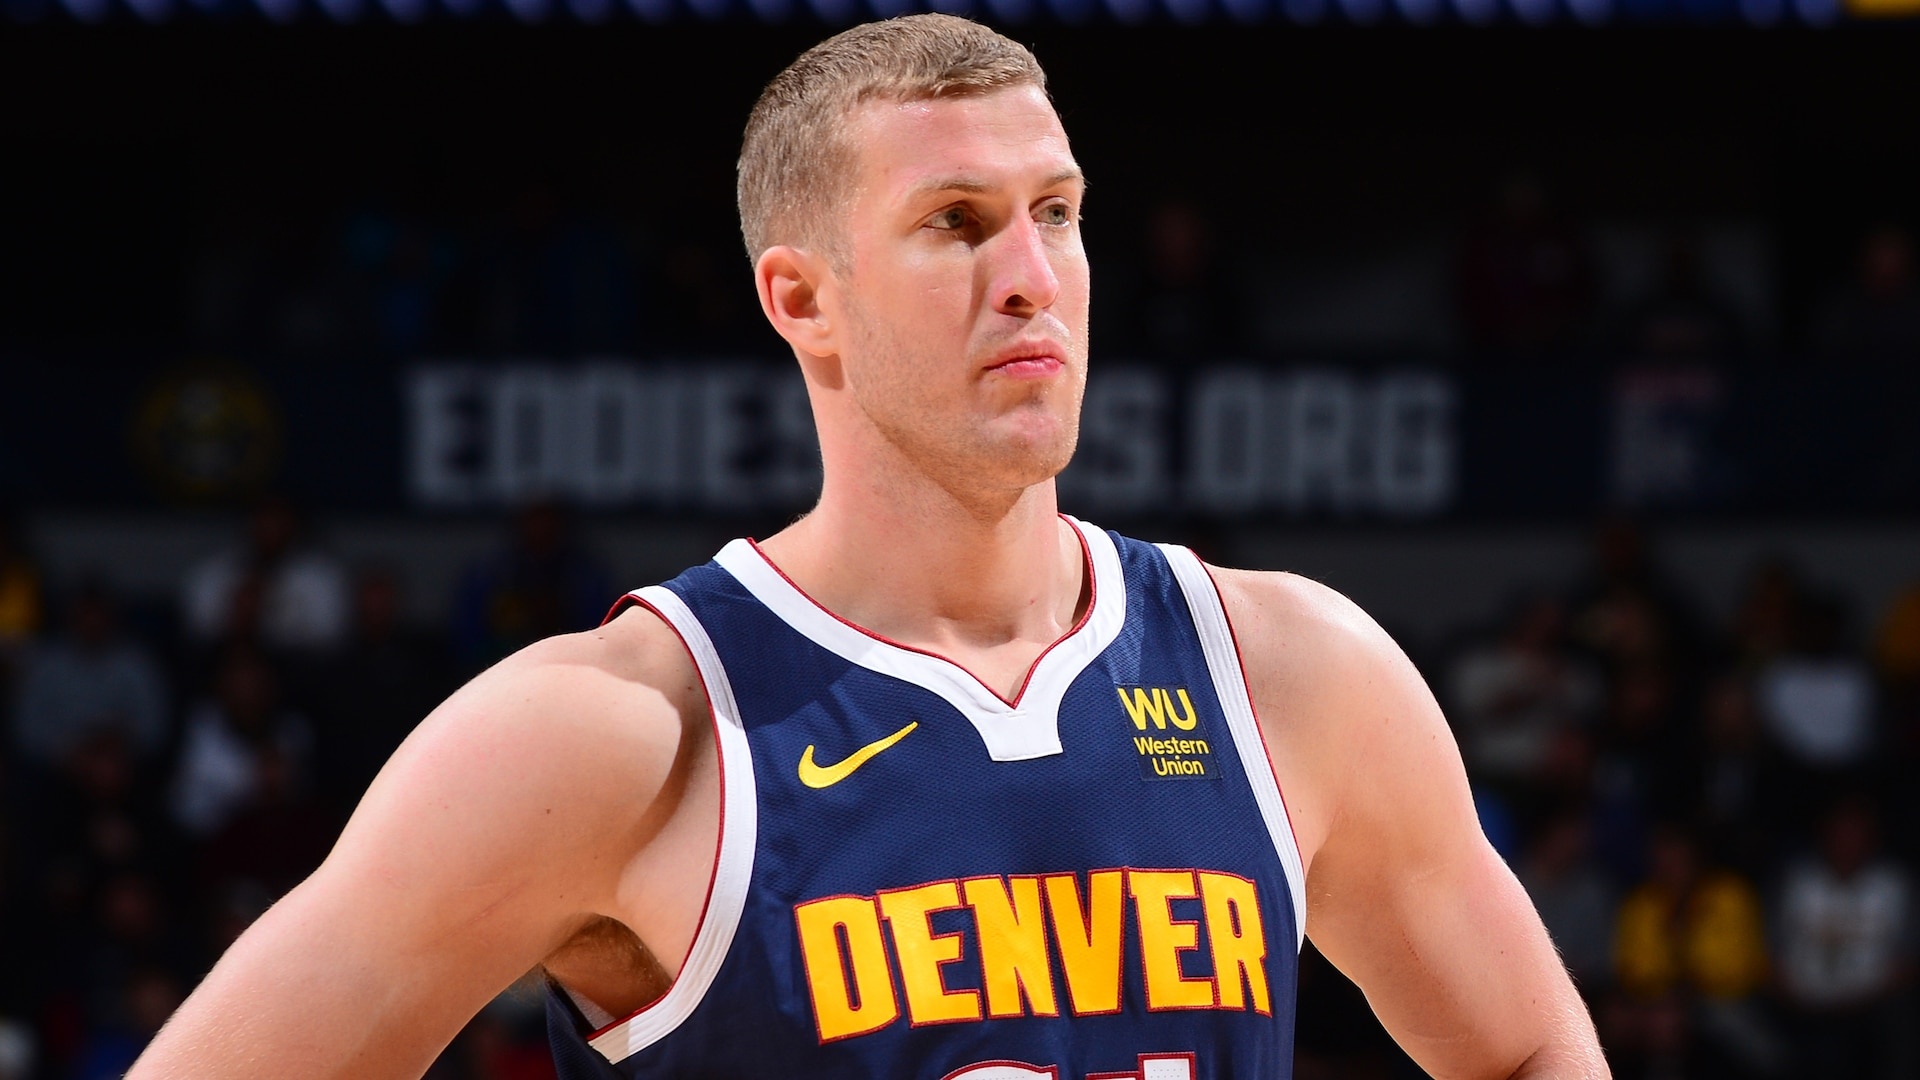 Mason Plumlee out with foot injury, Denver Nuggets, 1920x1080 Full HD Desktop